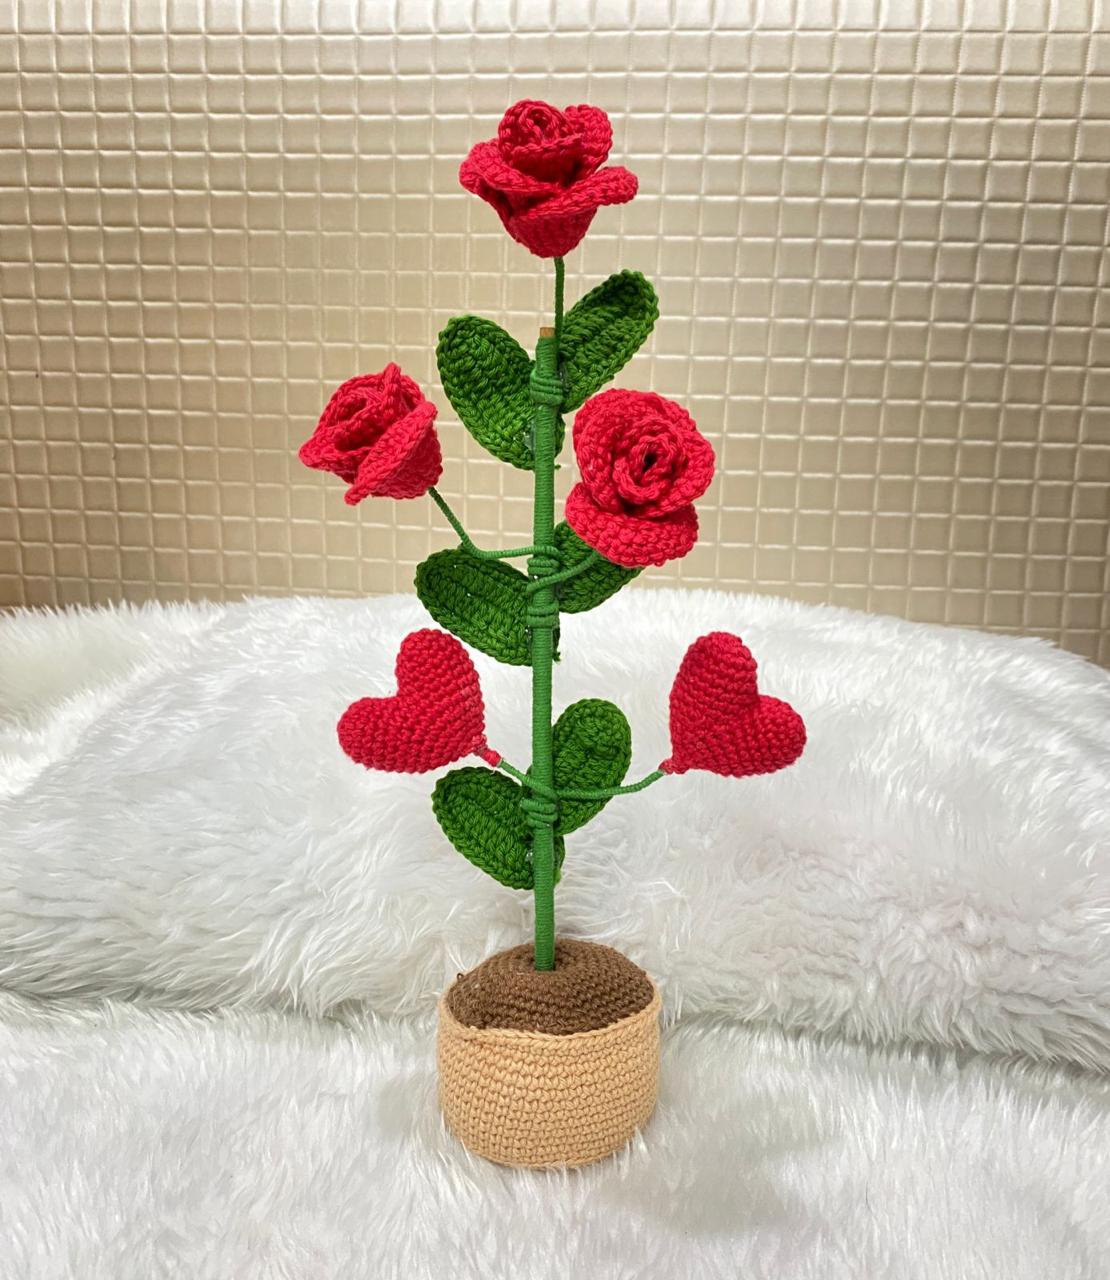 BlossomStitch: Handcrafted Crochet Rose Pot